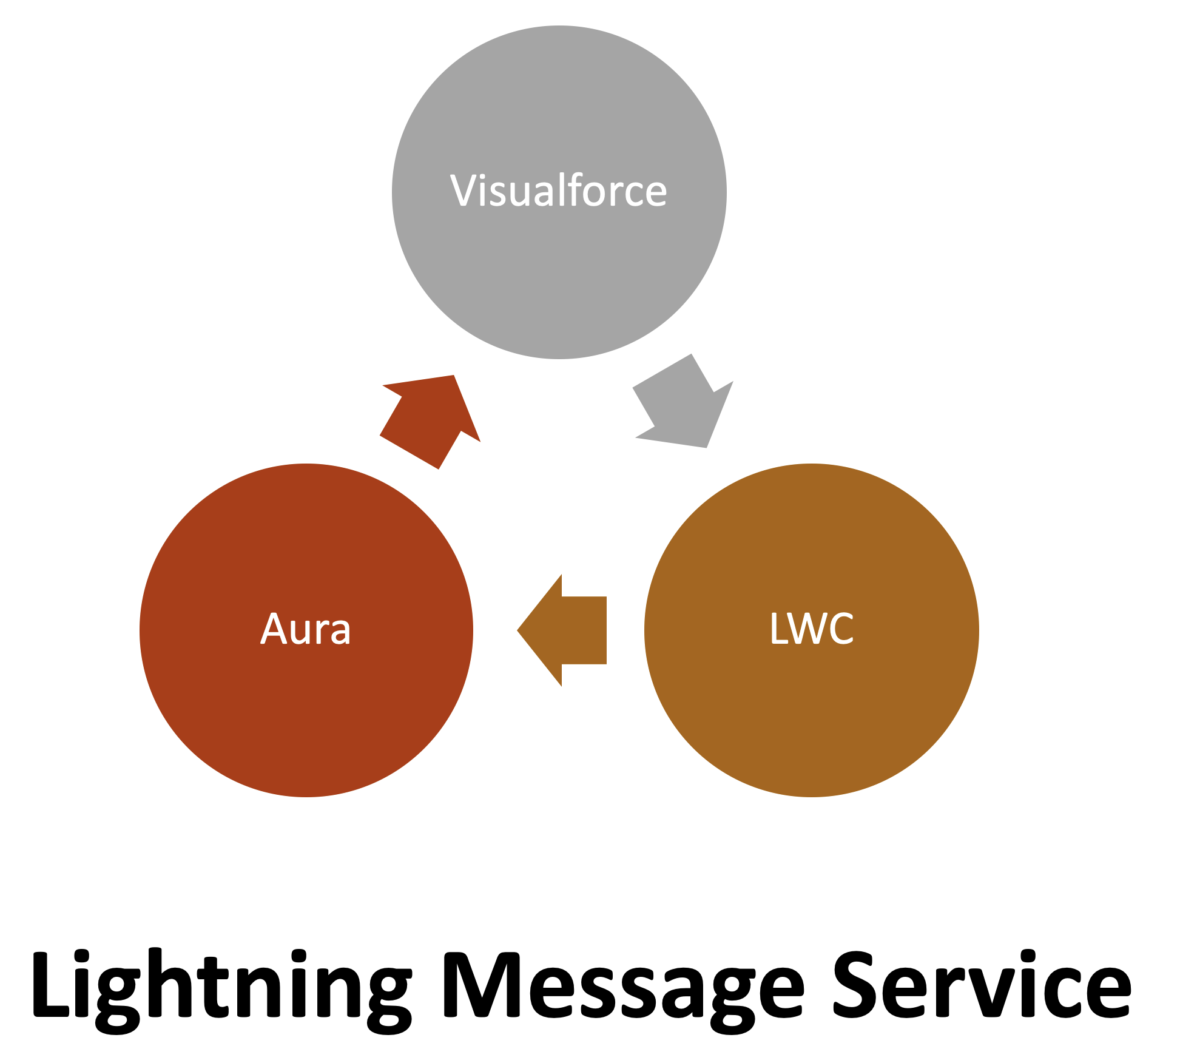 Event Handling between Aura, Lightning Web Components (LWC) and Visualforce